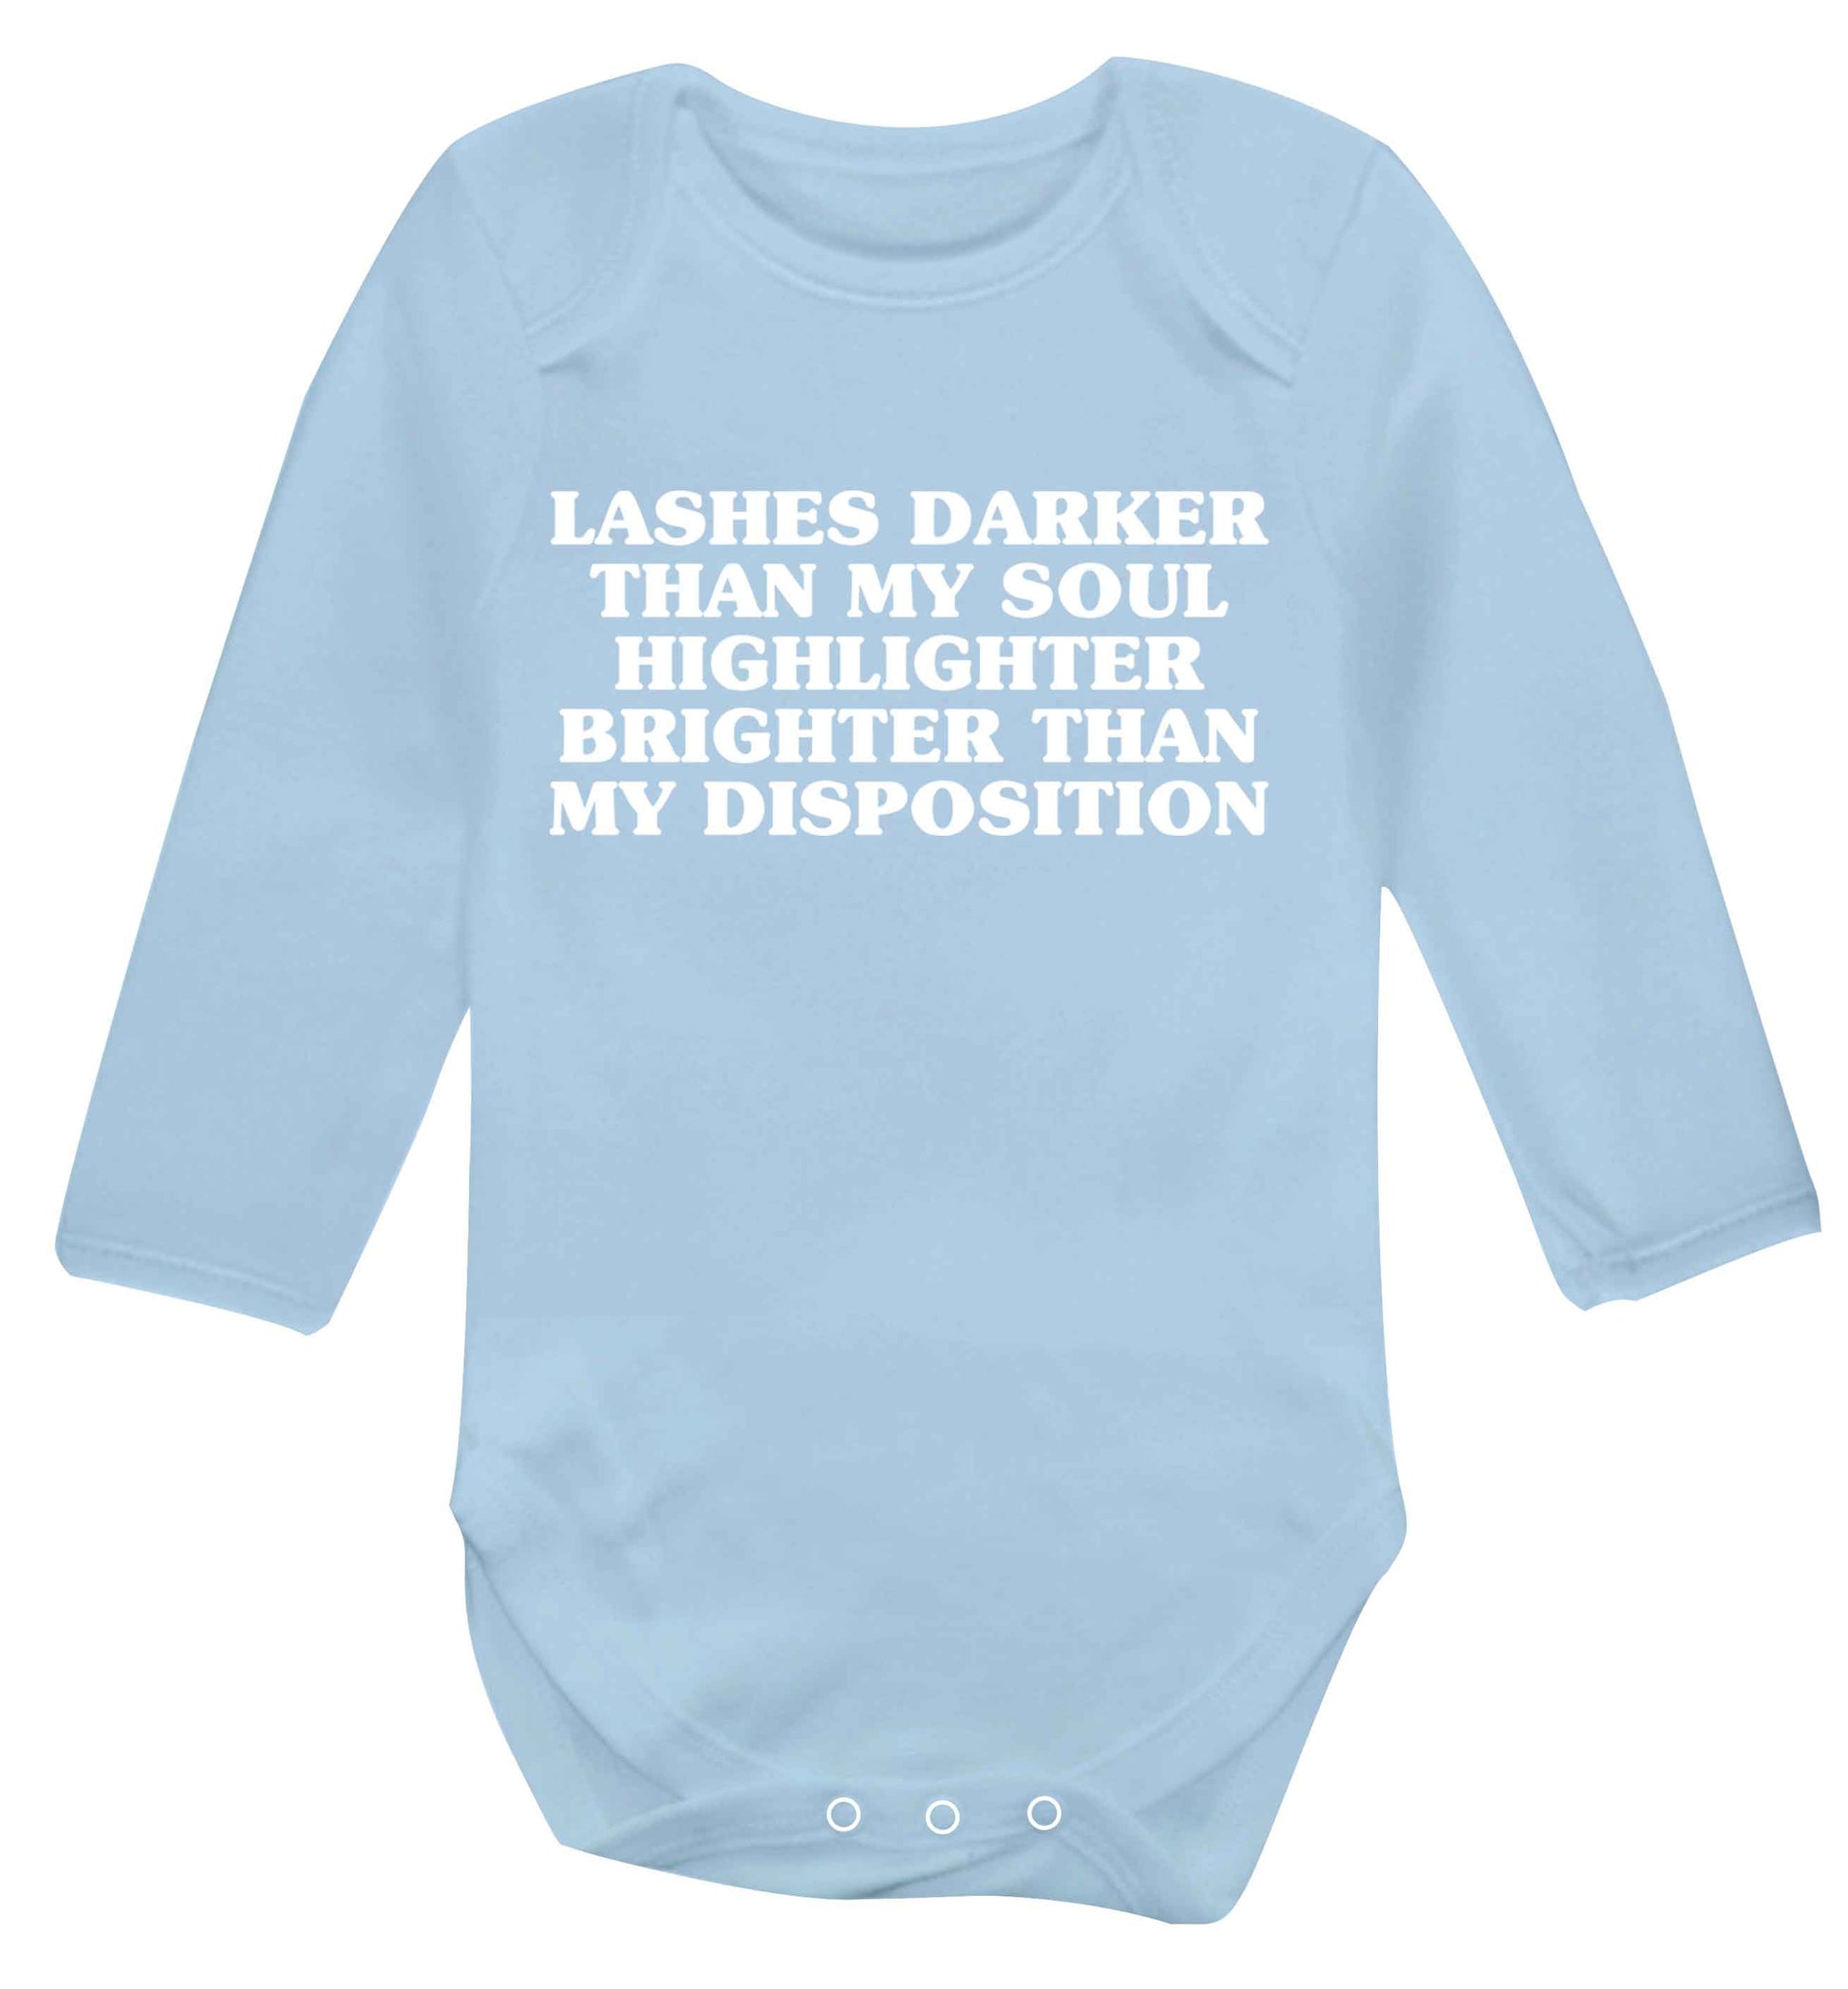 Lashes darker than my soul, highlighter brighter than my disposition Baby Vest long sleeved pale blue 6-12 months